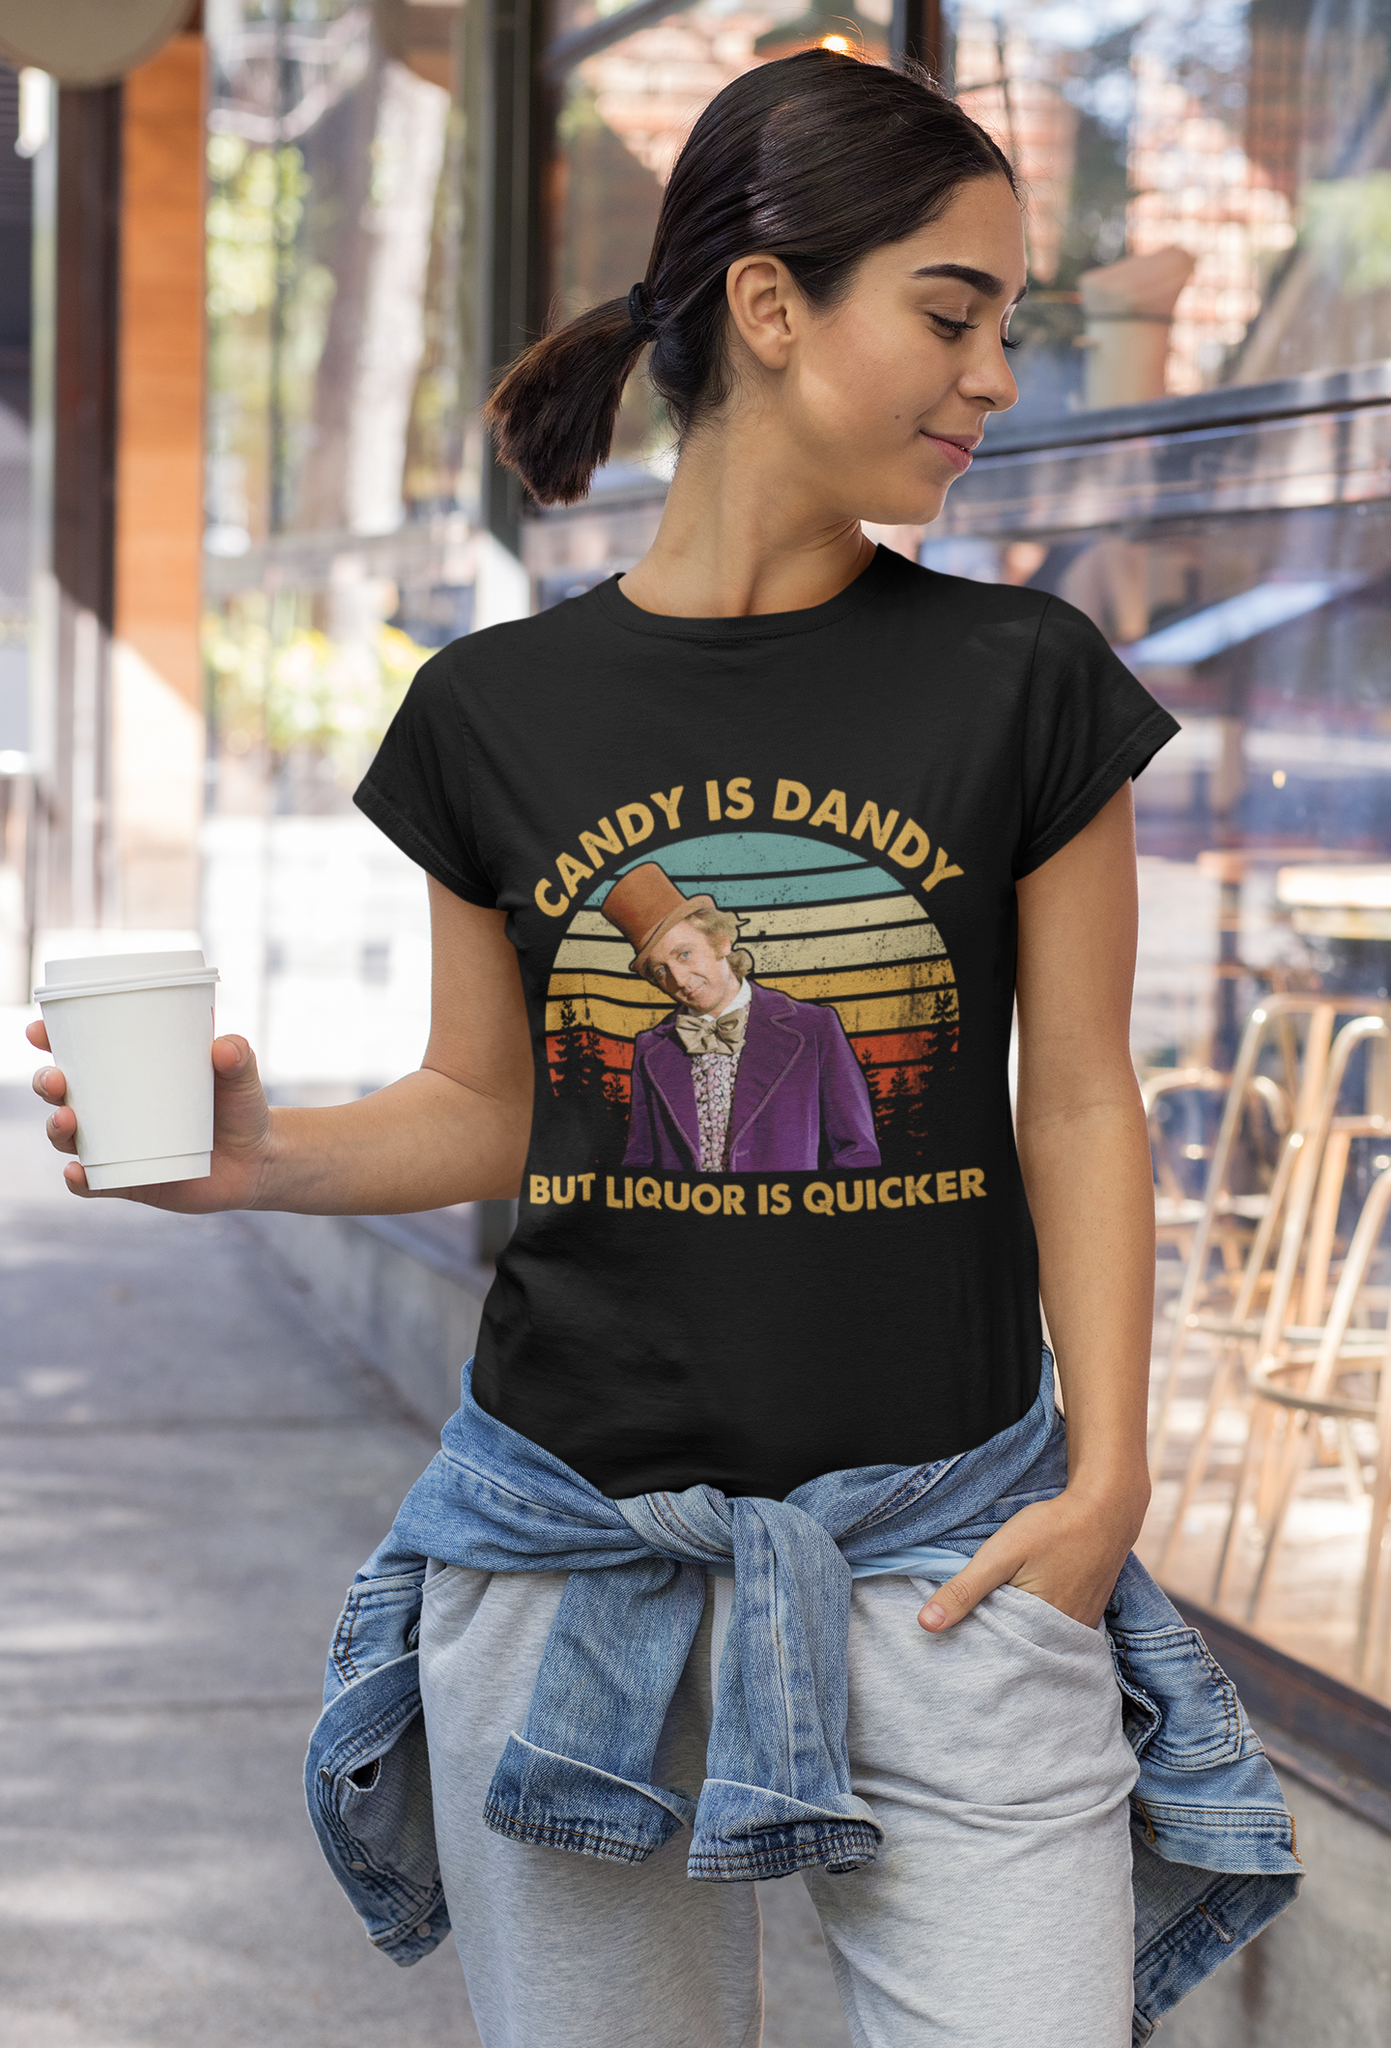 Charlie And The Chocolate Factory Vintage T Shirt, Willy Wonka T Shirt, Candy Is Dandy Tshirt